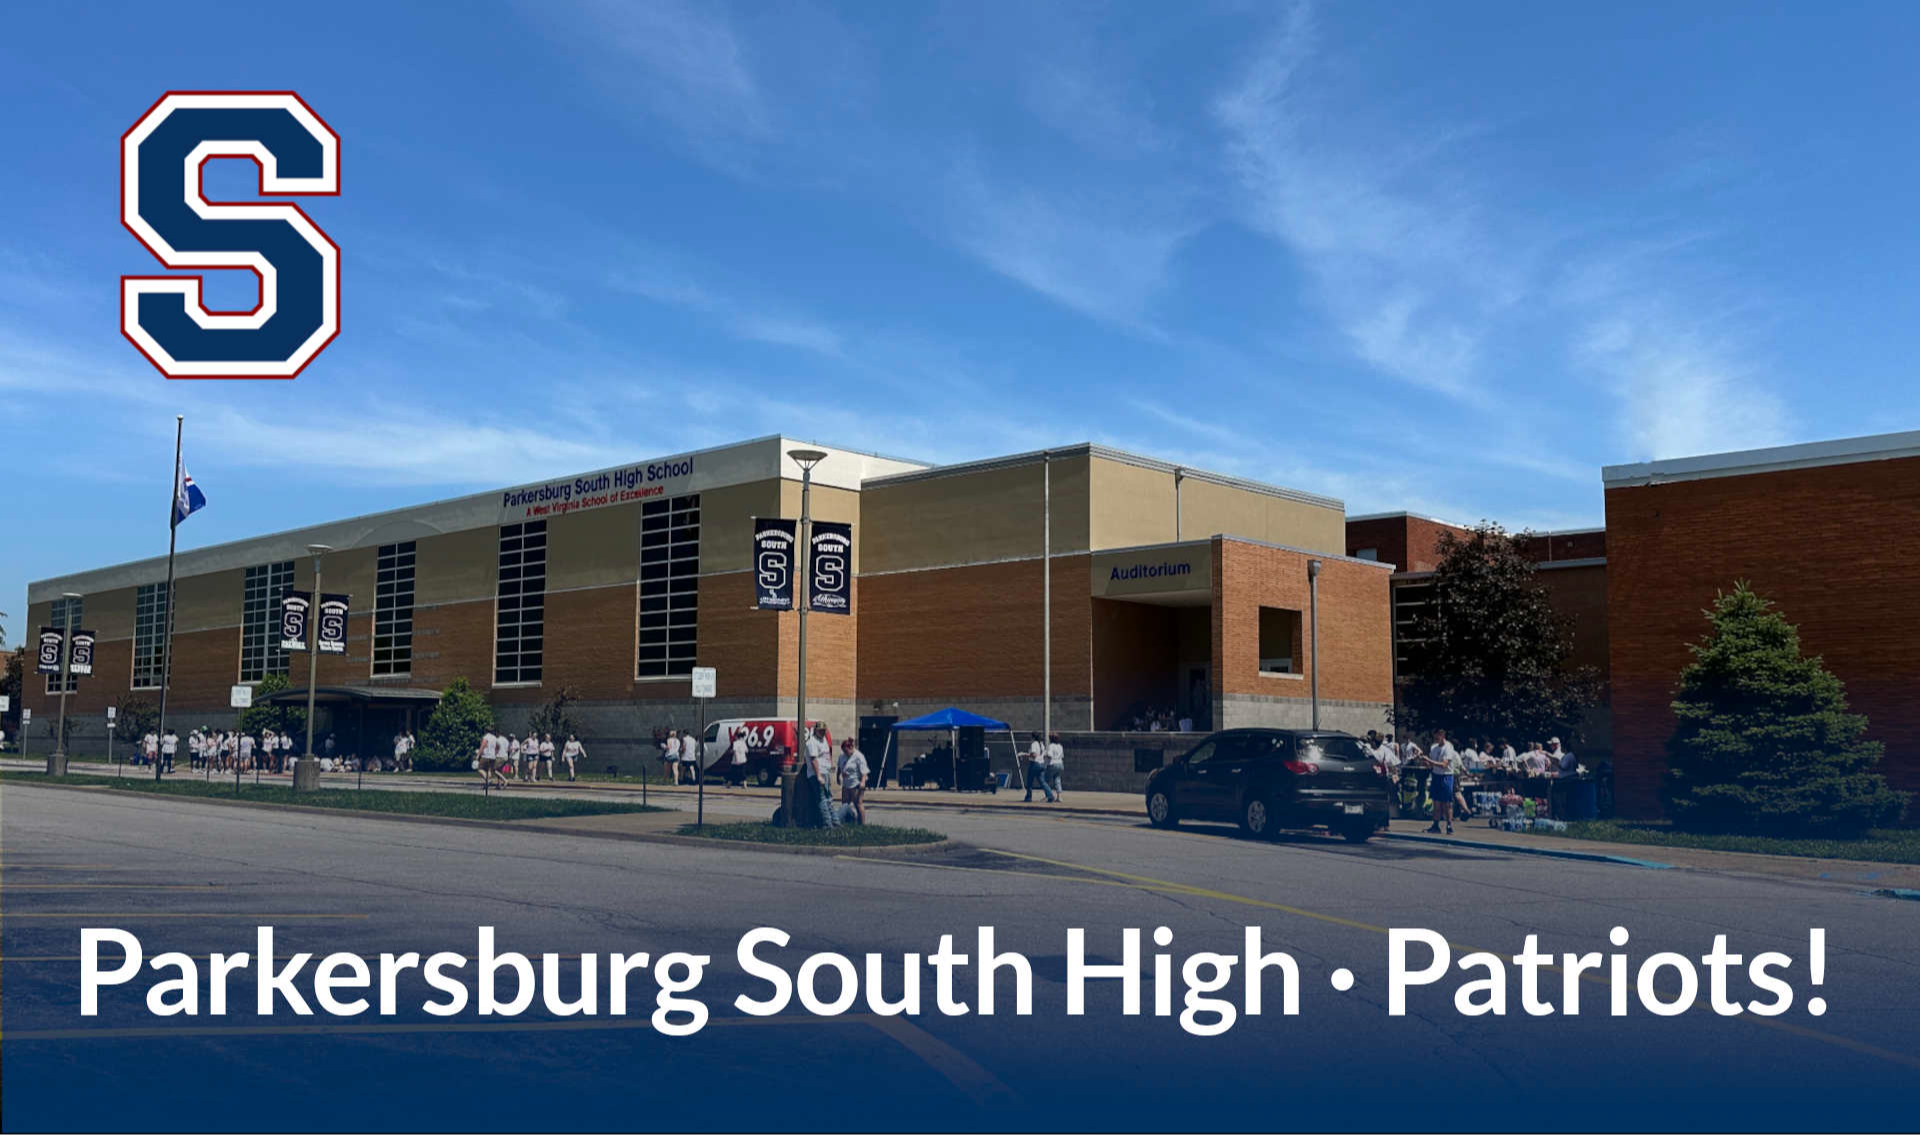 Photo of PARKERSBURG SOUTH HIGH SCHOOL.